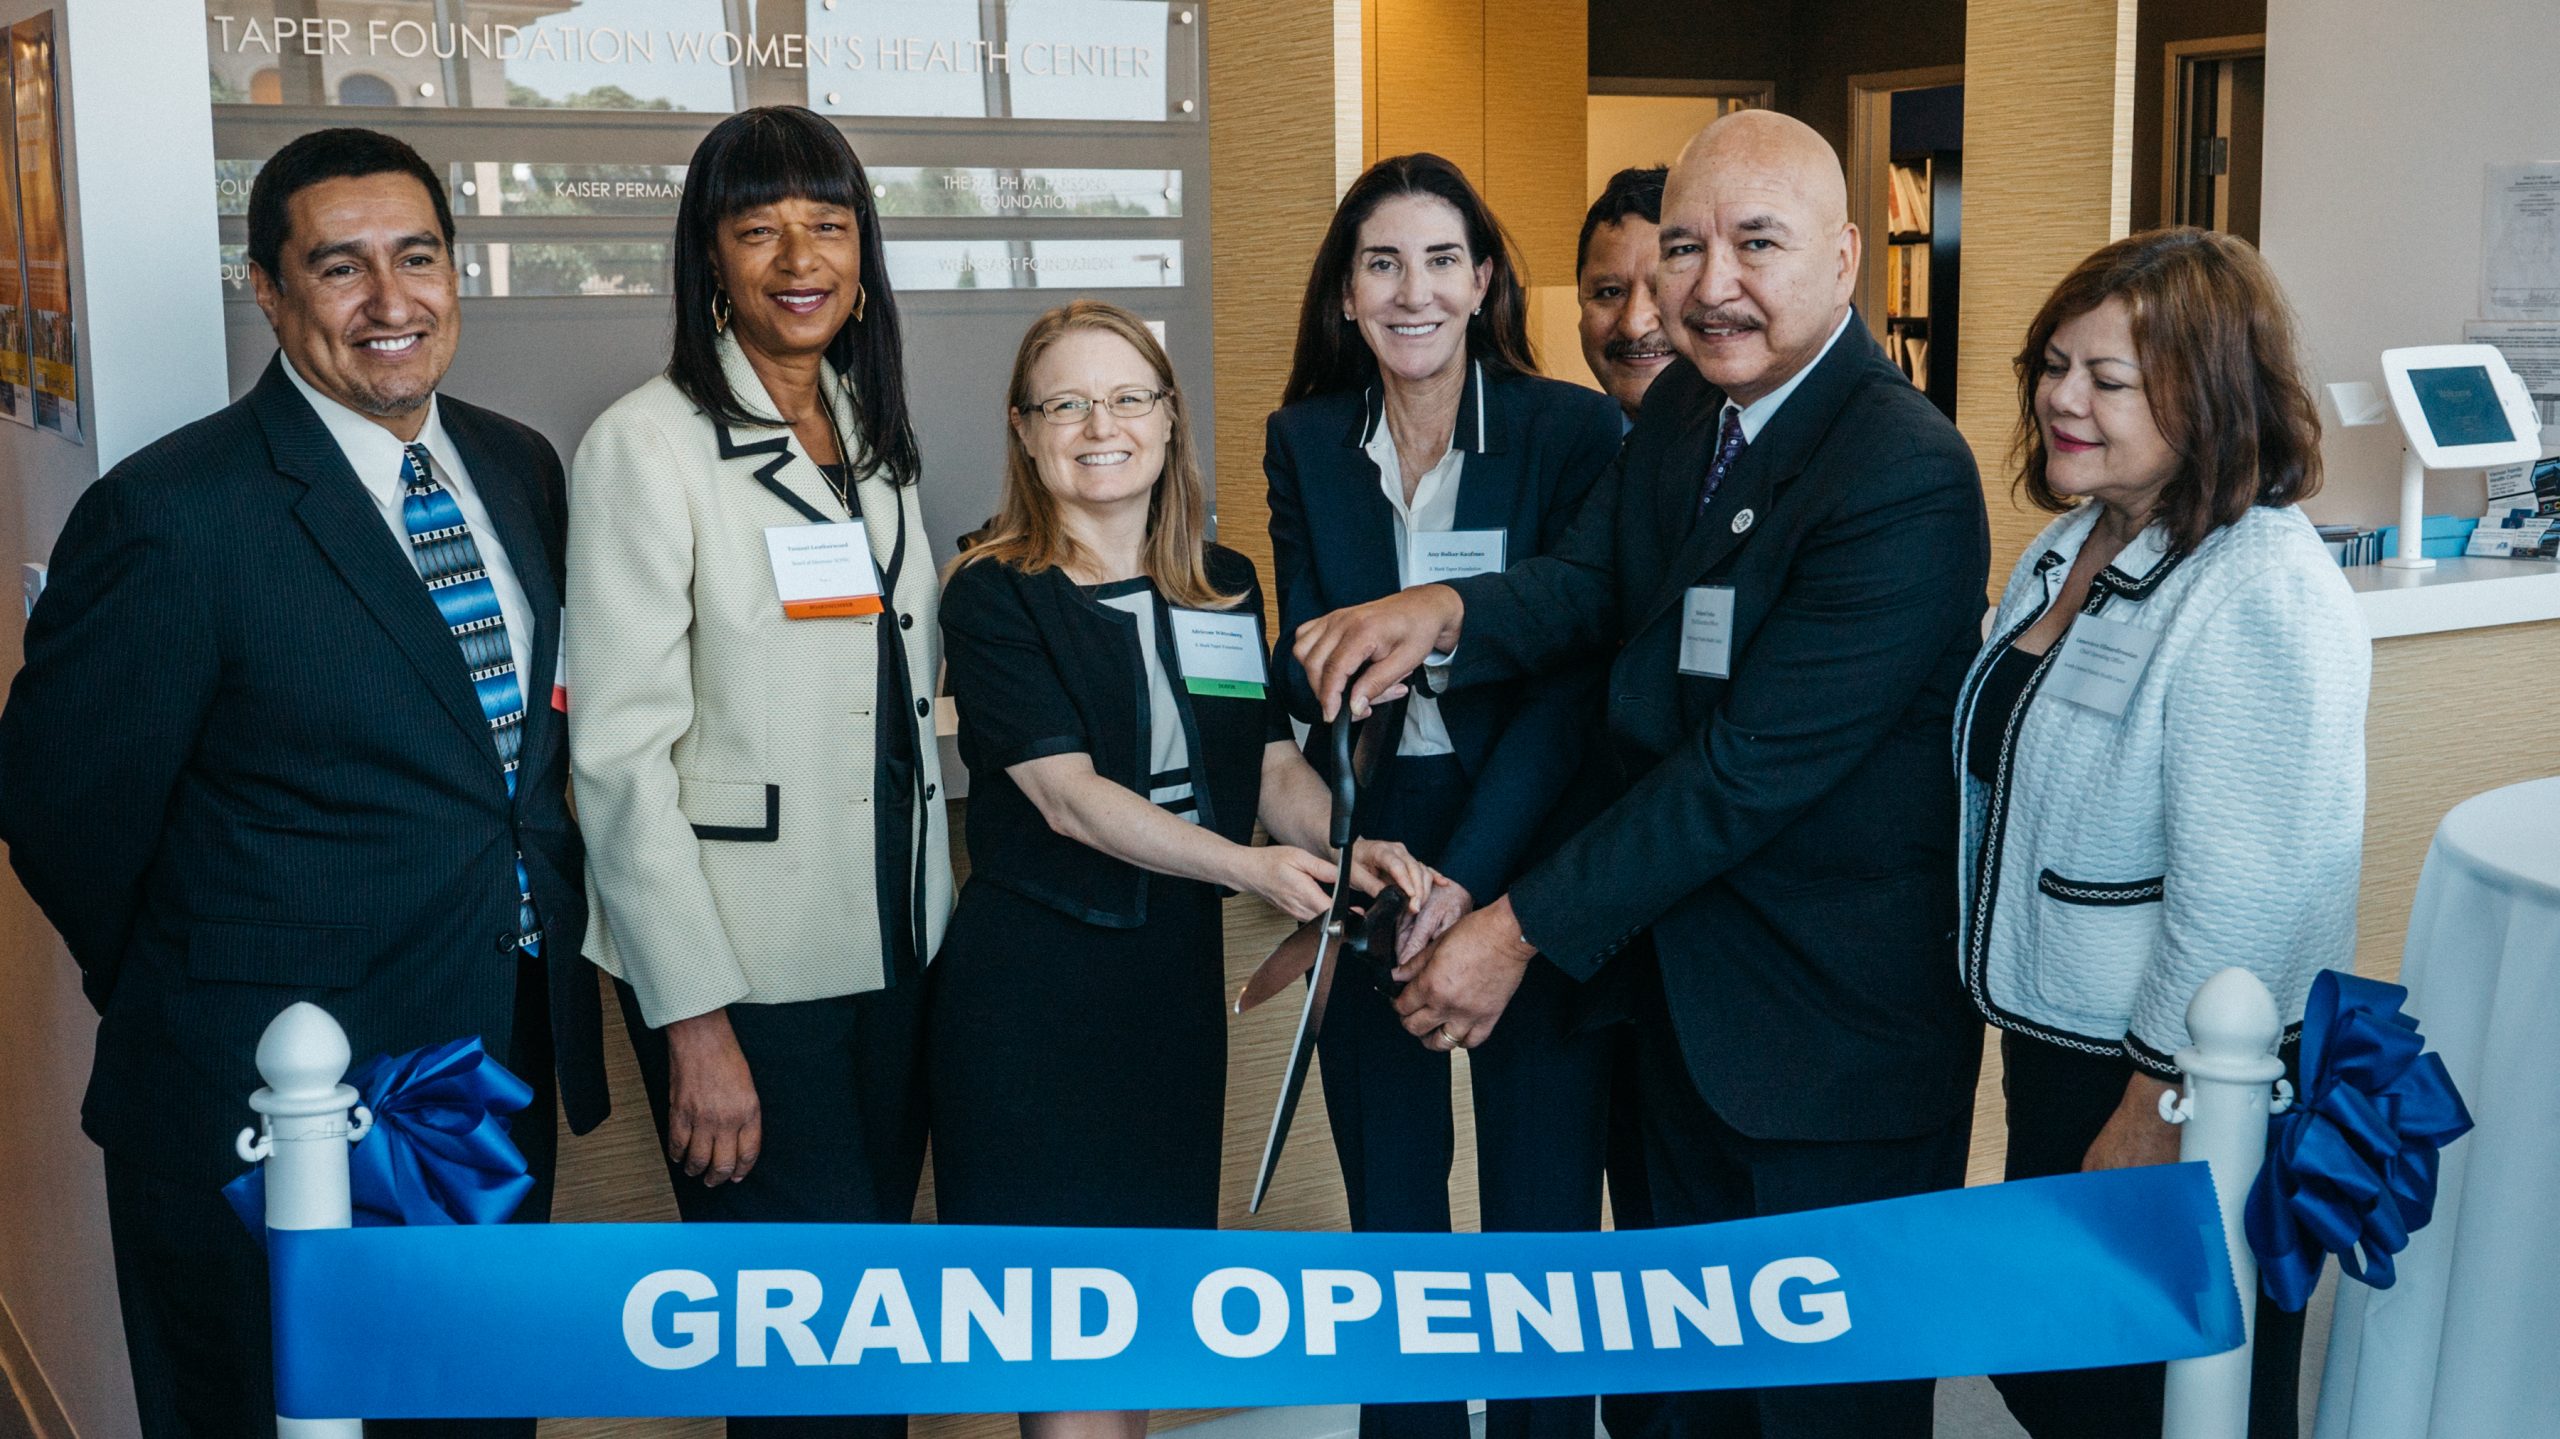 Ribbon cutting with Adrienne Wittenberg and Amy Bolker-Kaufman from the S. Mark Taper Foundation and SCFHC Senior Staff. The S. Mark Taper Foundation Women's Health Center will provide culturally appropriate care for women, who make up 60% of our patients.